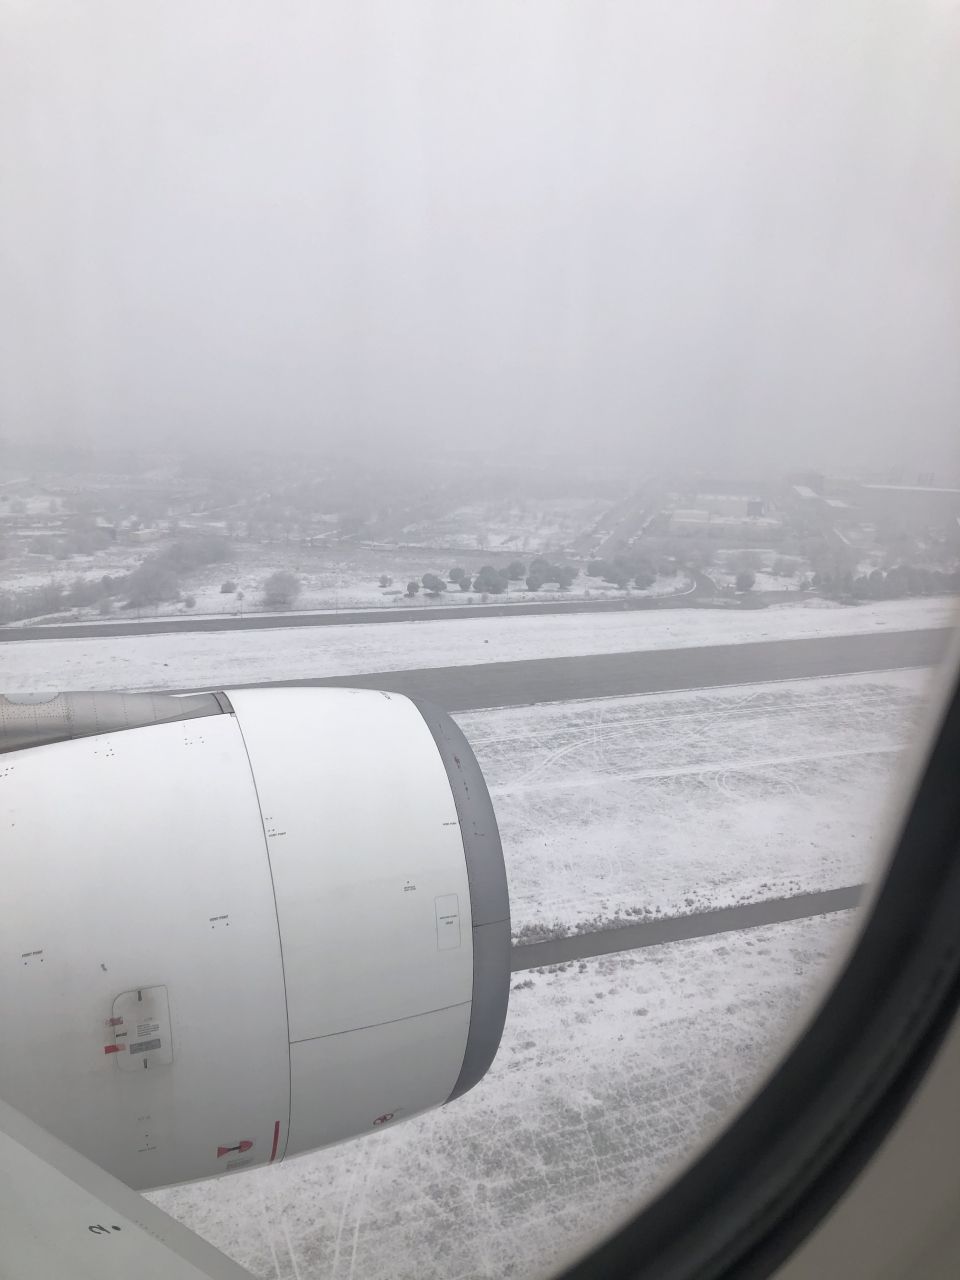 Looking outside an airplane window at an engine and a very snowy runway/town.